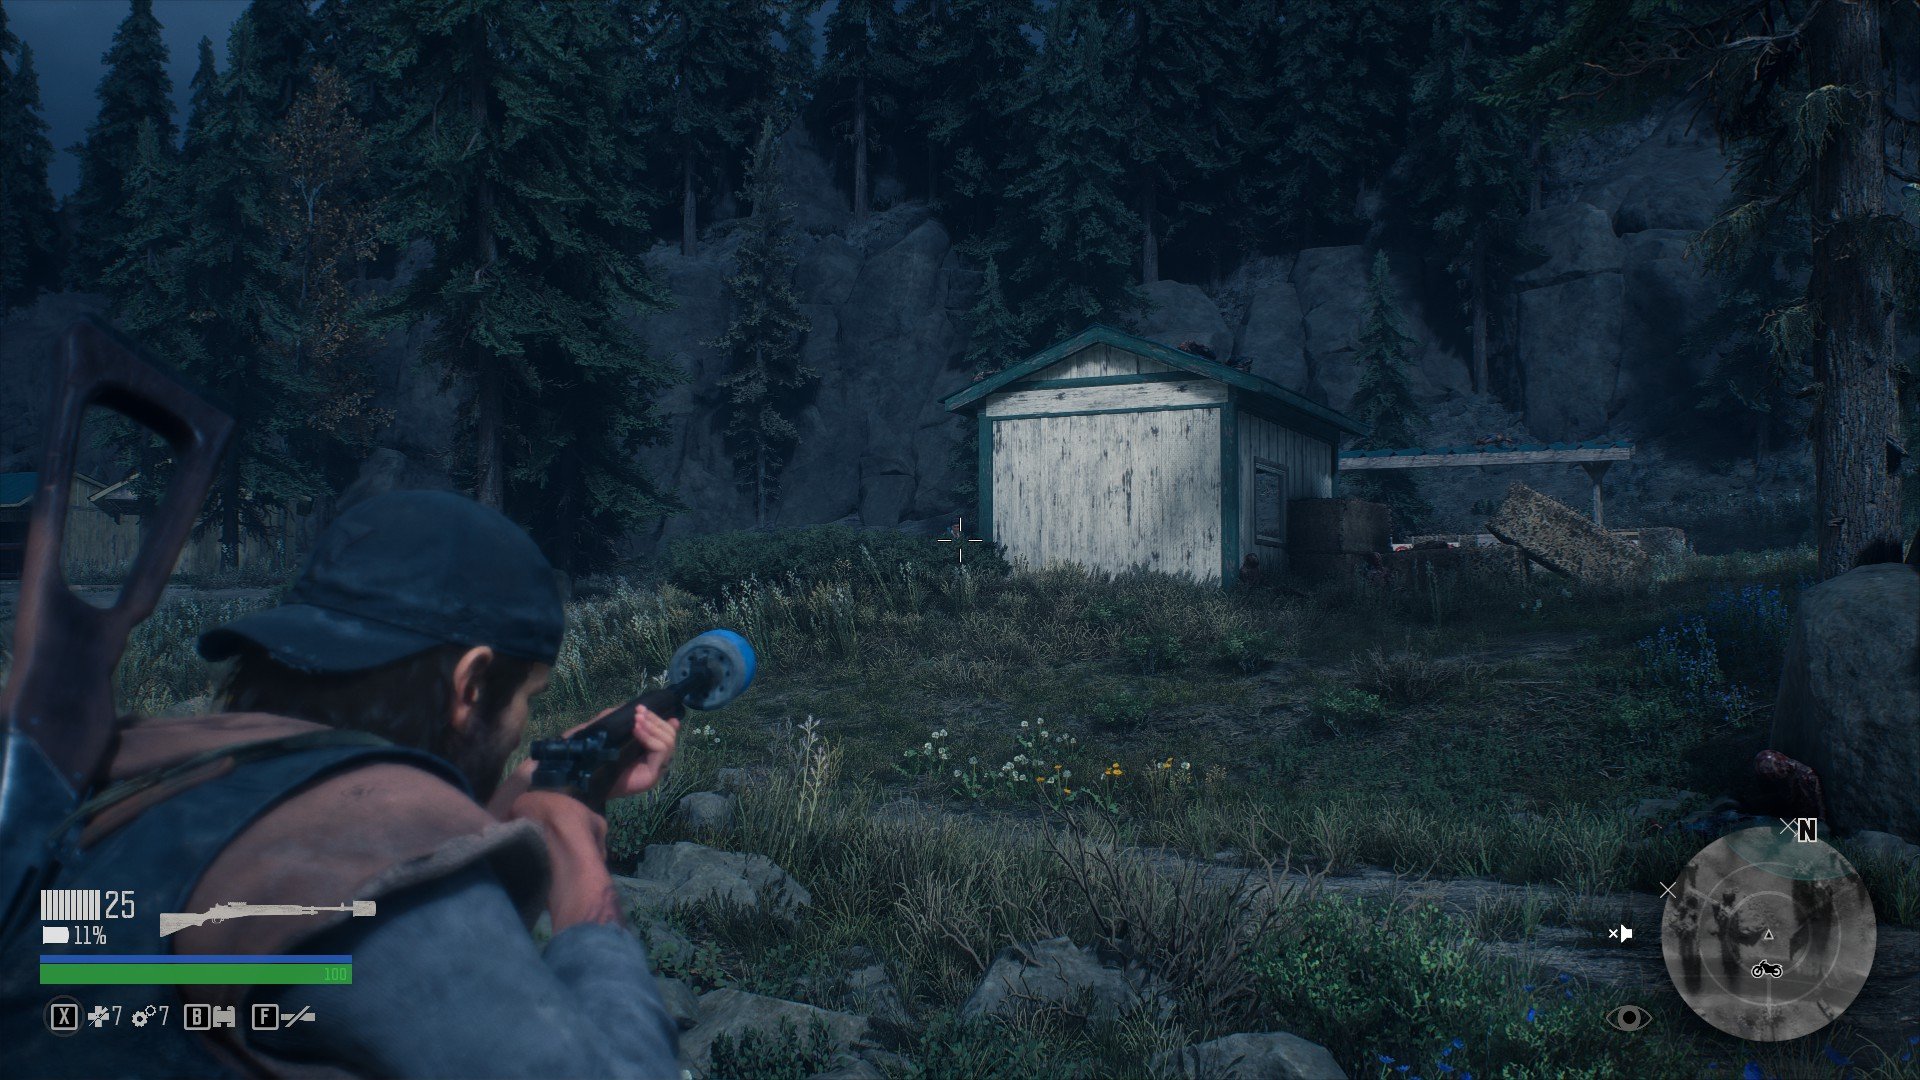 Why 'Days Gone' Isn't a Zombie Game